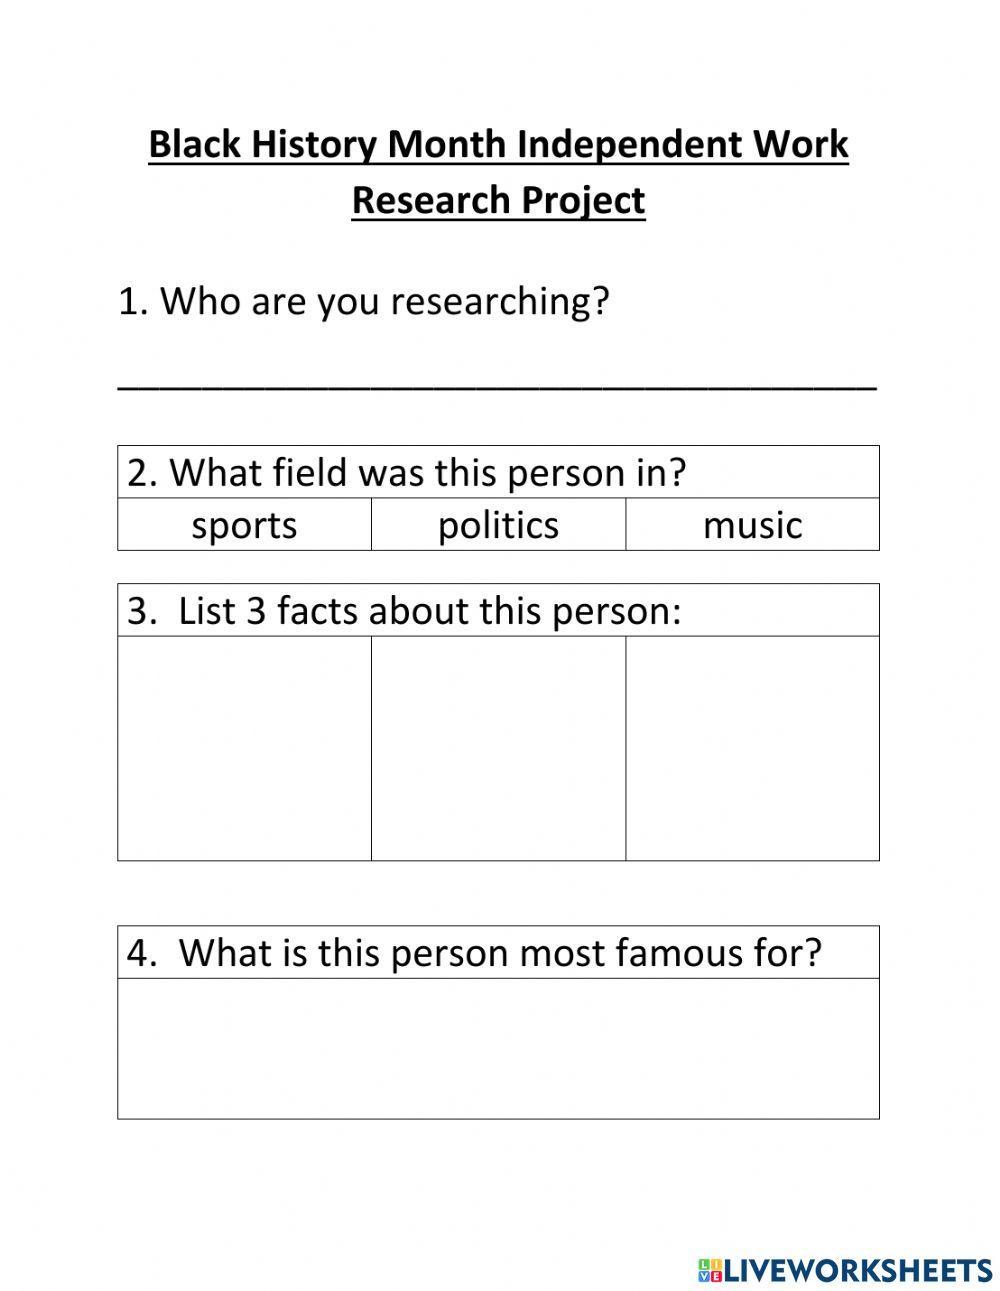 Black History Month Research Project